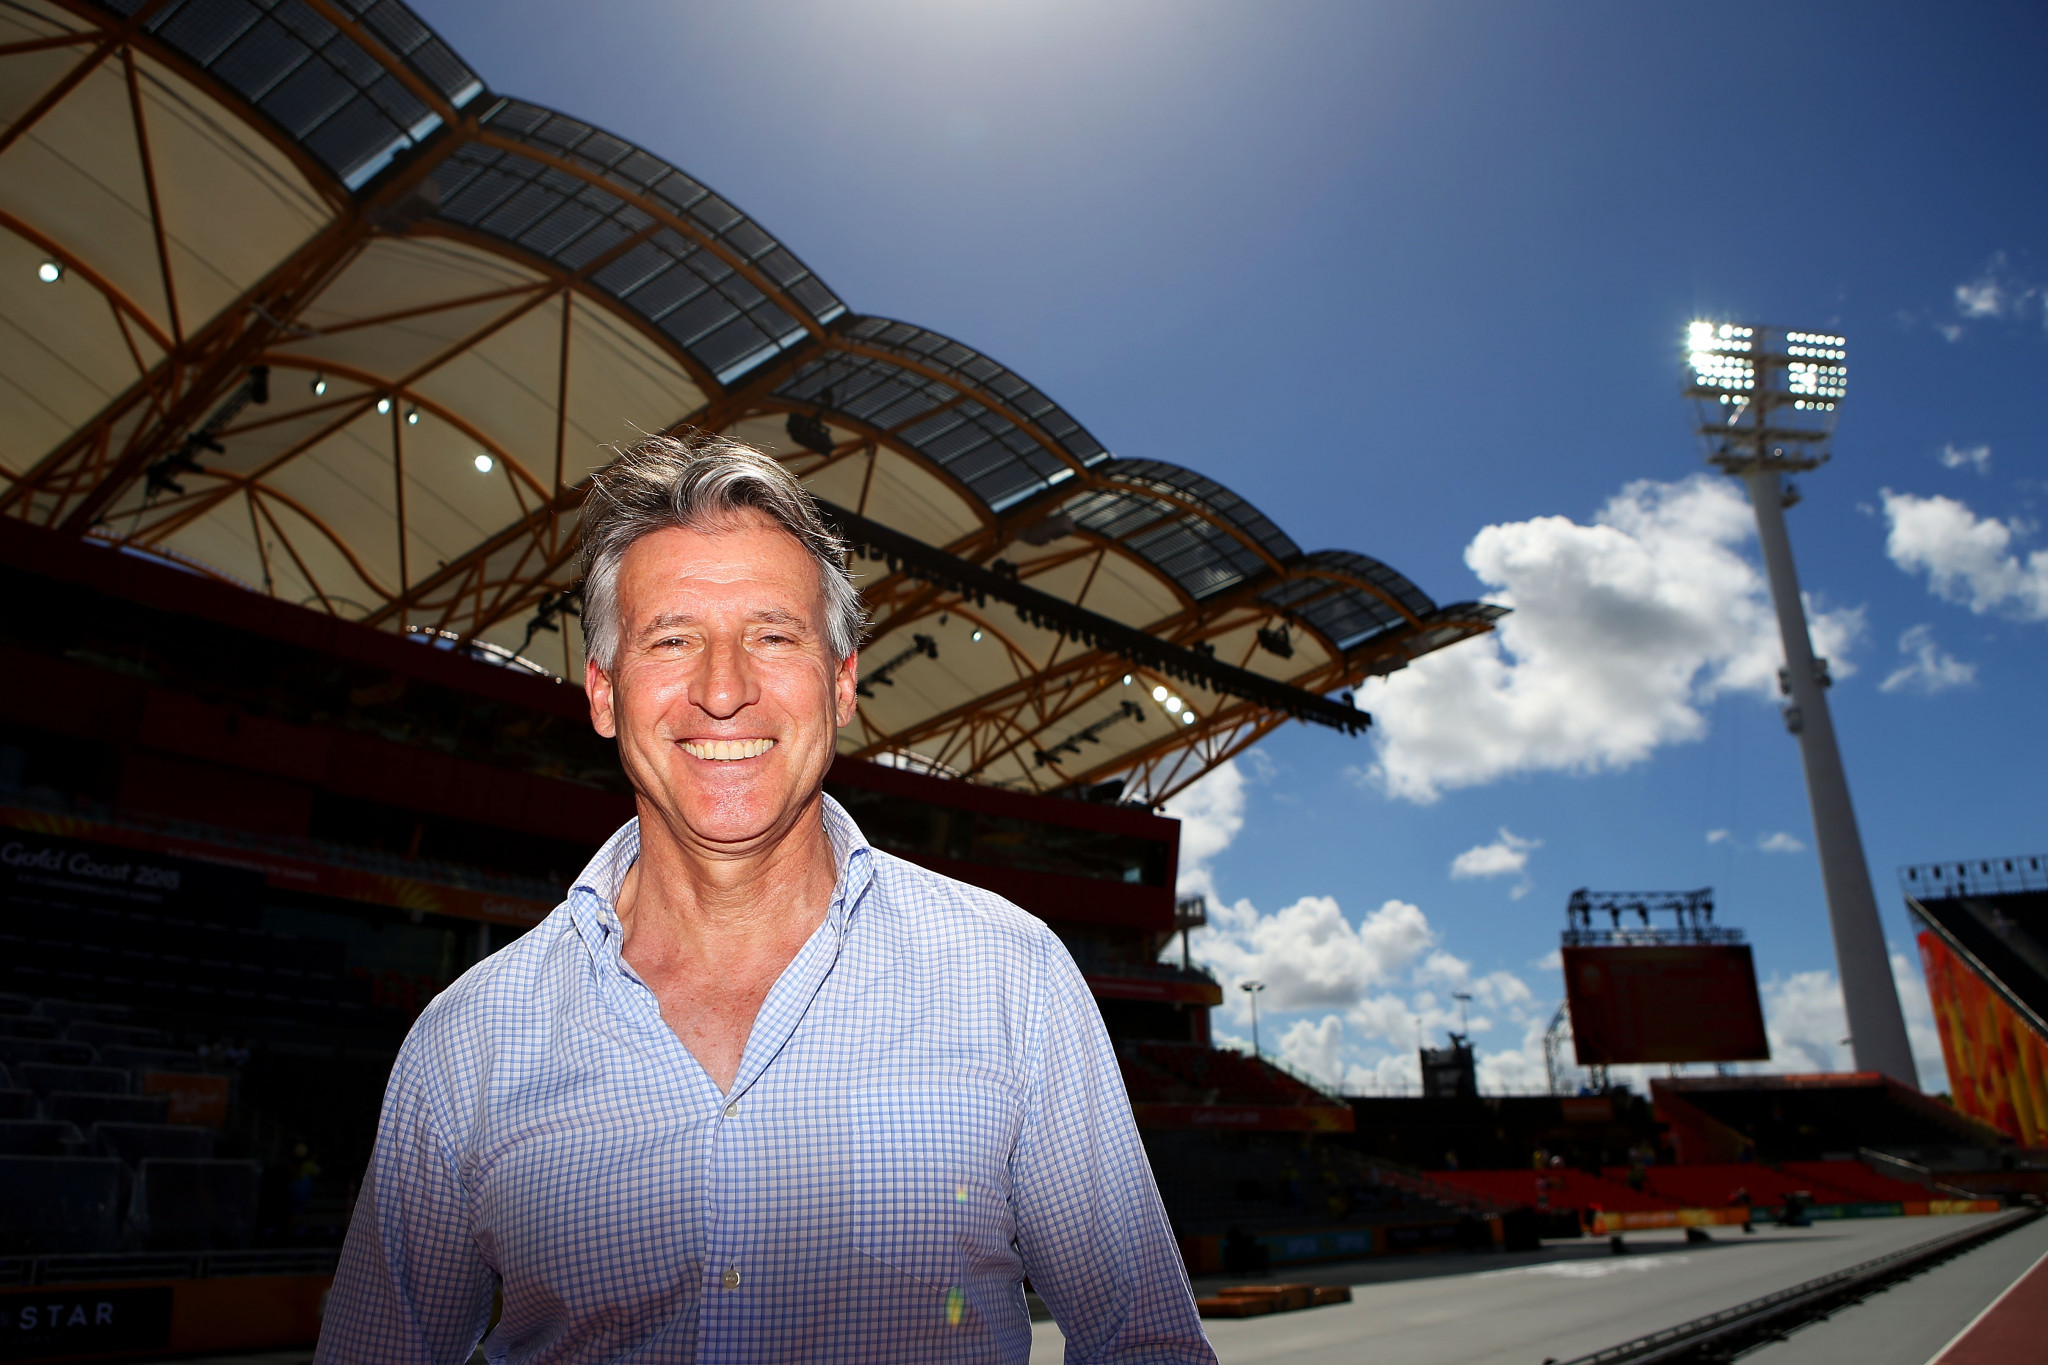 Coe welcomes prospect of Queensland bid for IAAF World Championships after success of Gold Coast 2018